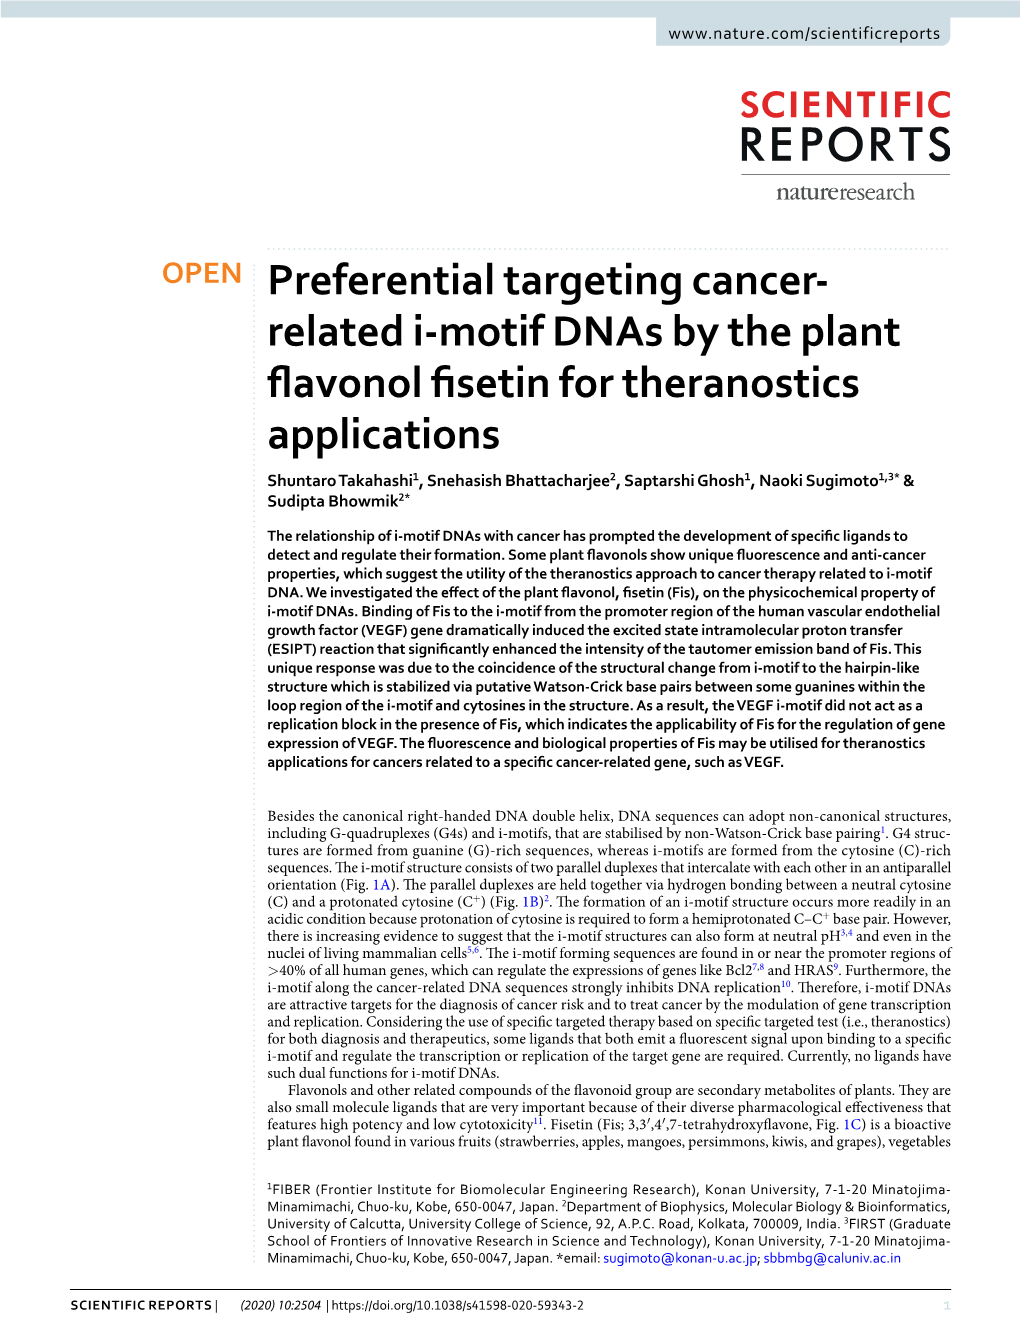 Preferential Targeting Cancer-Related I-Motif Dnas by the Plant Flavonol